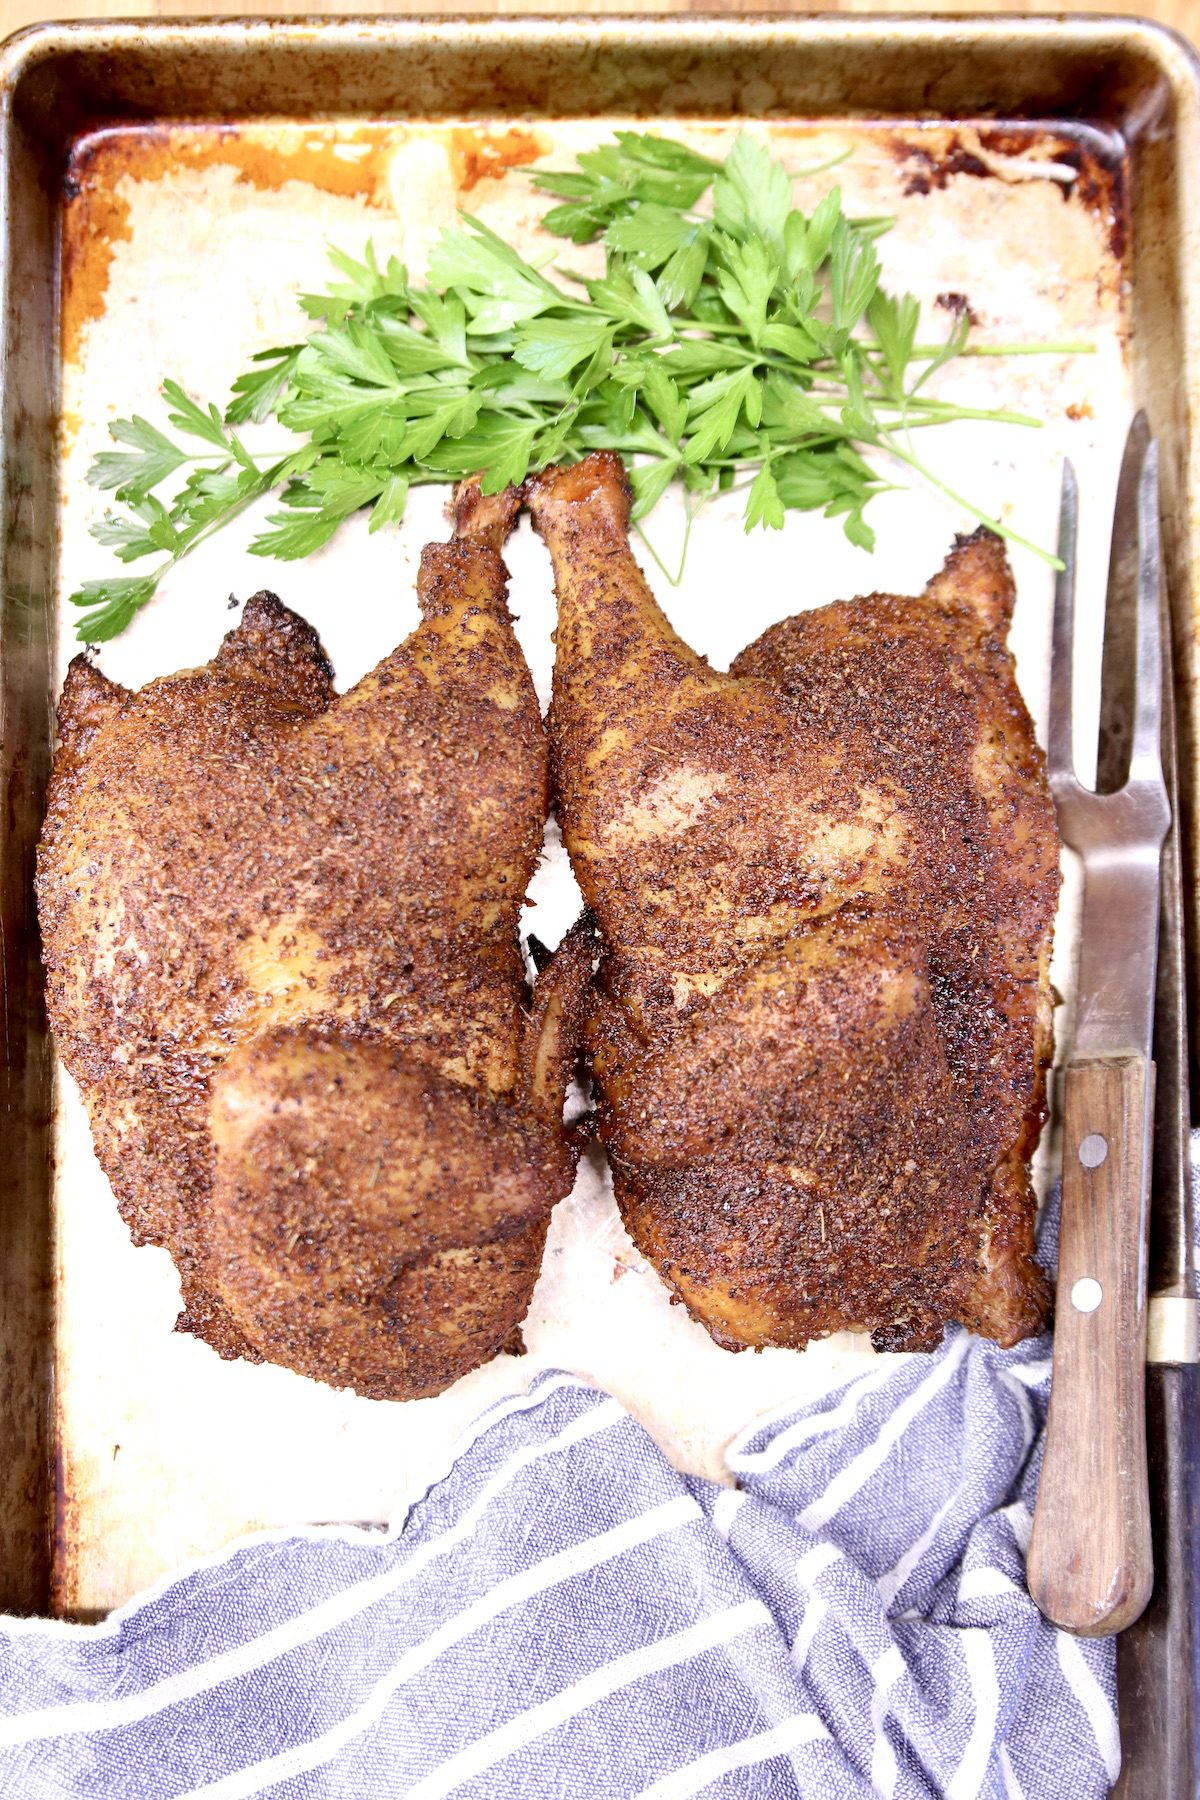 Grilled half chicken on a sheet pan with parsley, blue towel, meat fork and knife